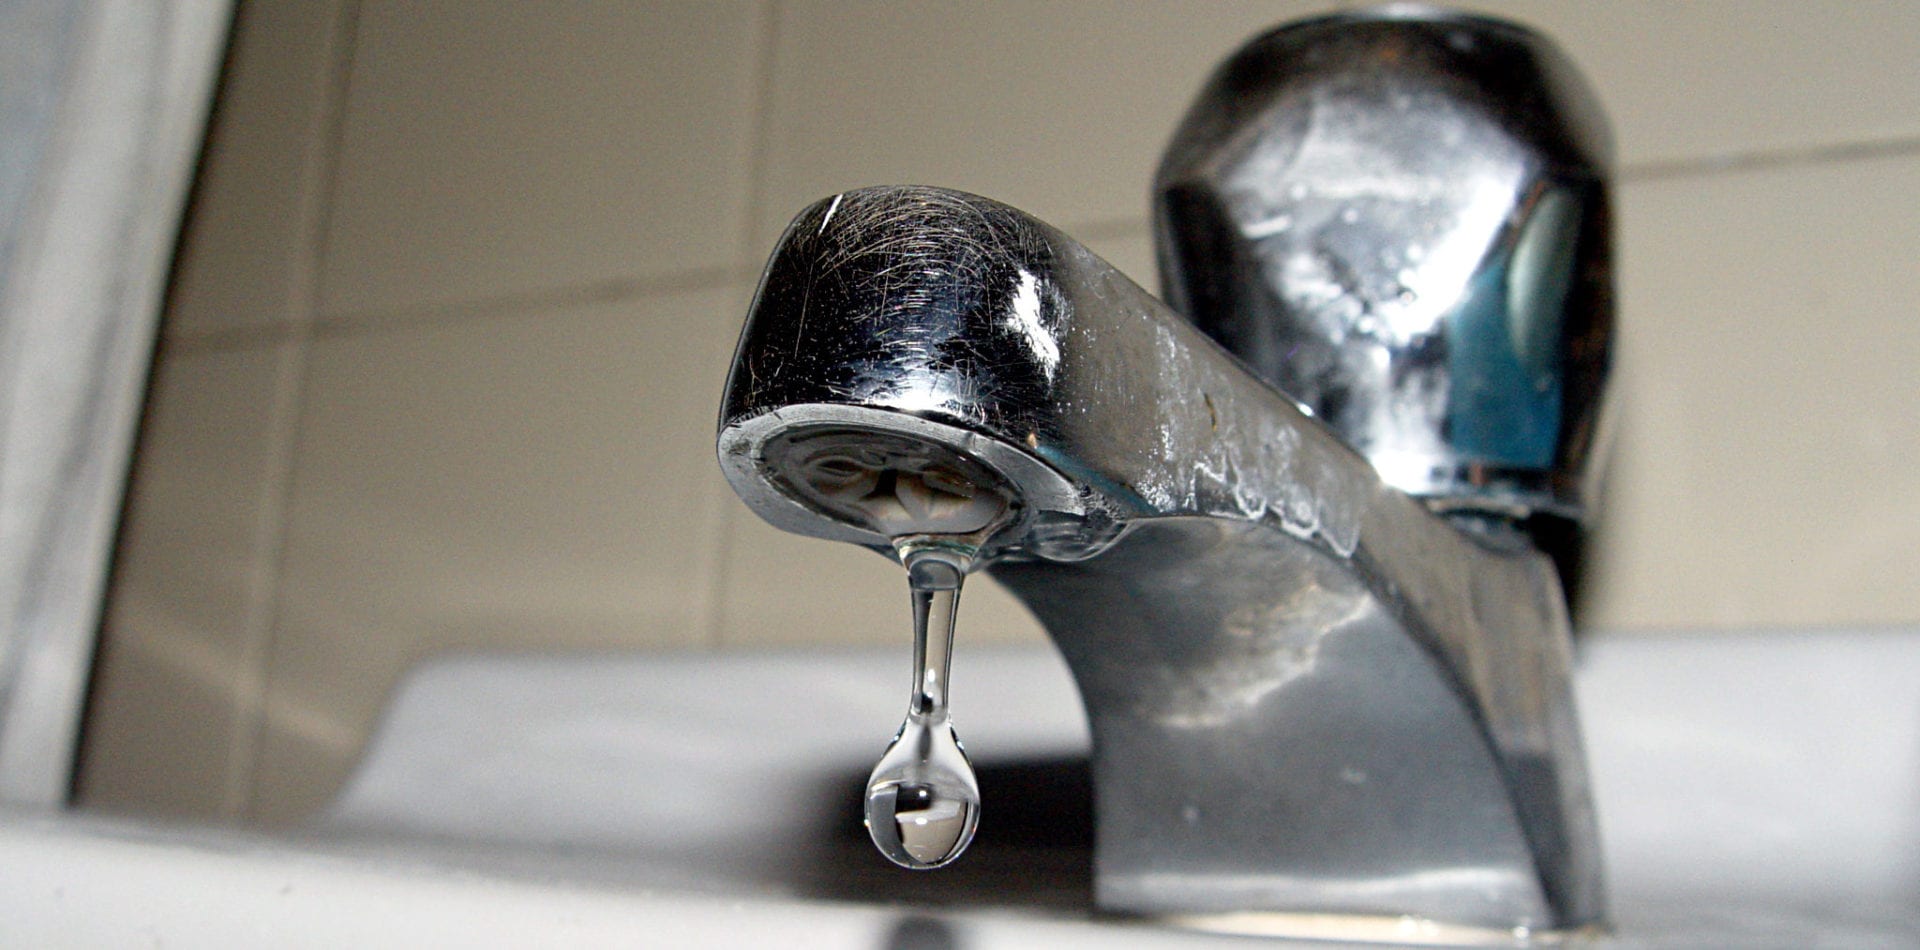 Dripping faucet? Solve your plumbing nightmares with Ben Franklin.